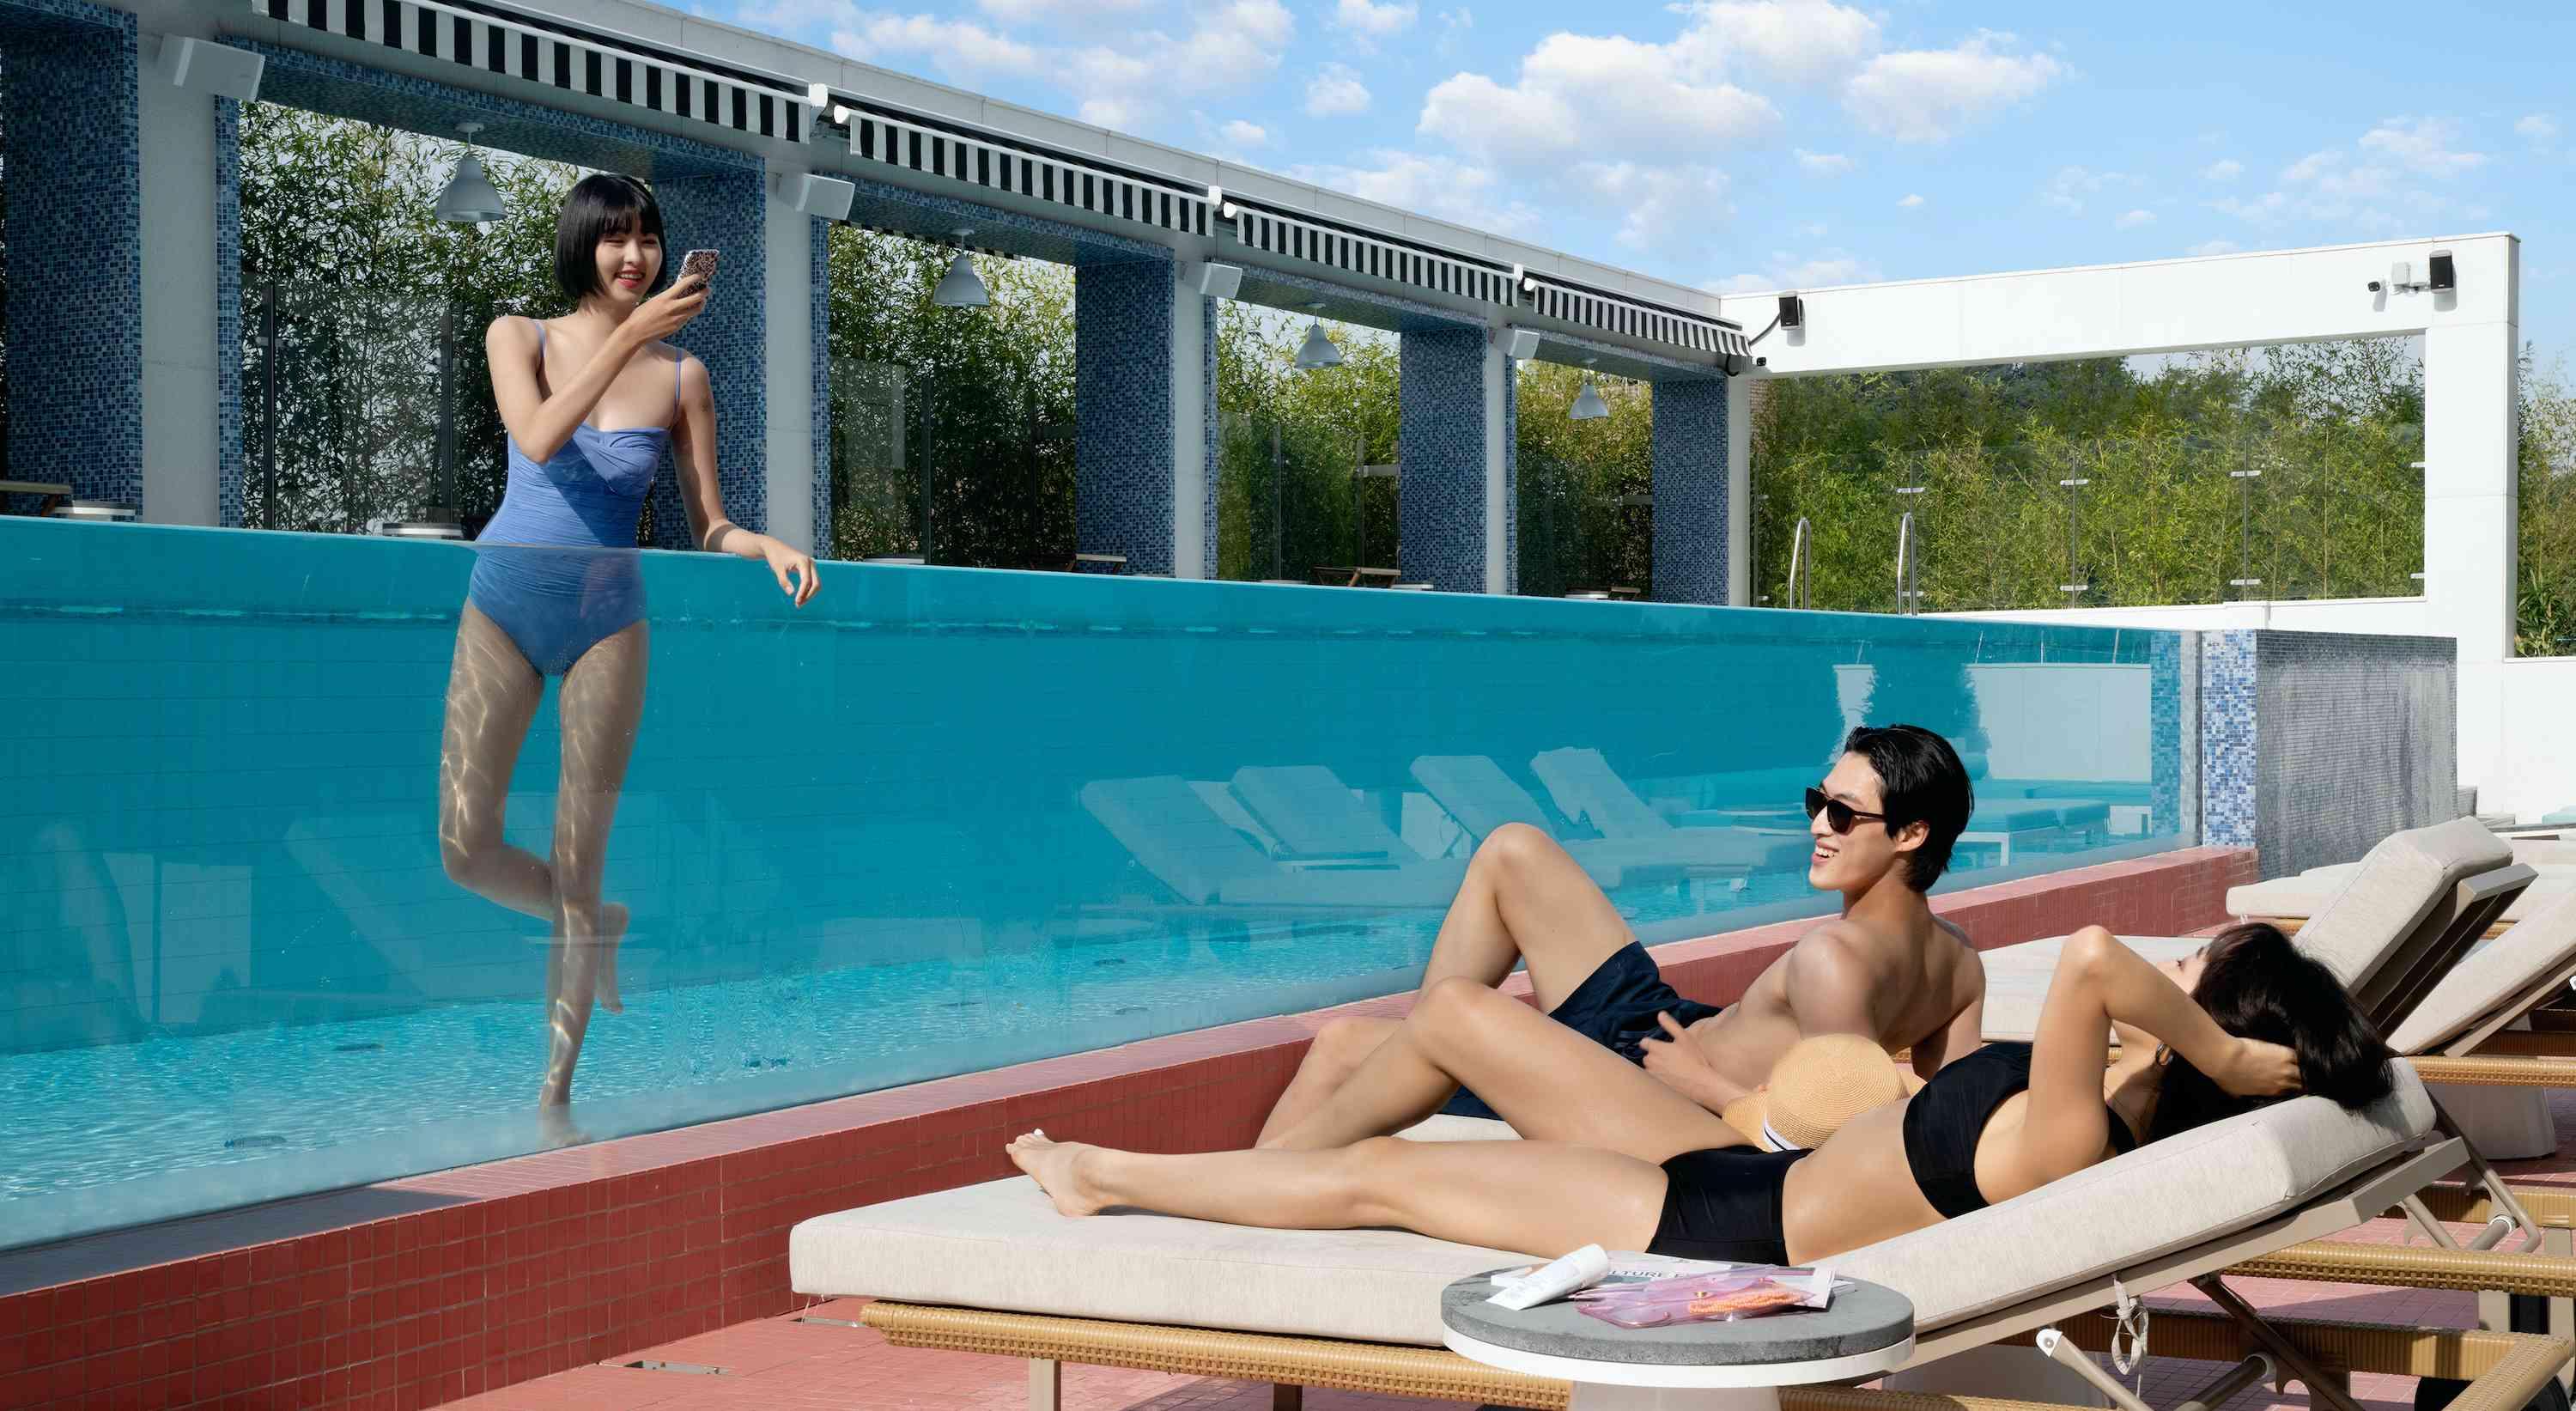 couple in loungers by a pool with a friend in the pool